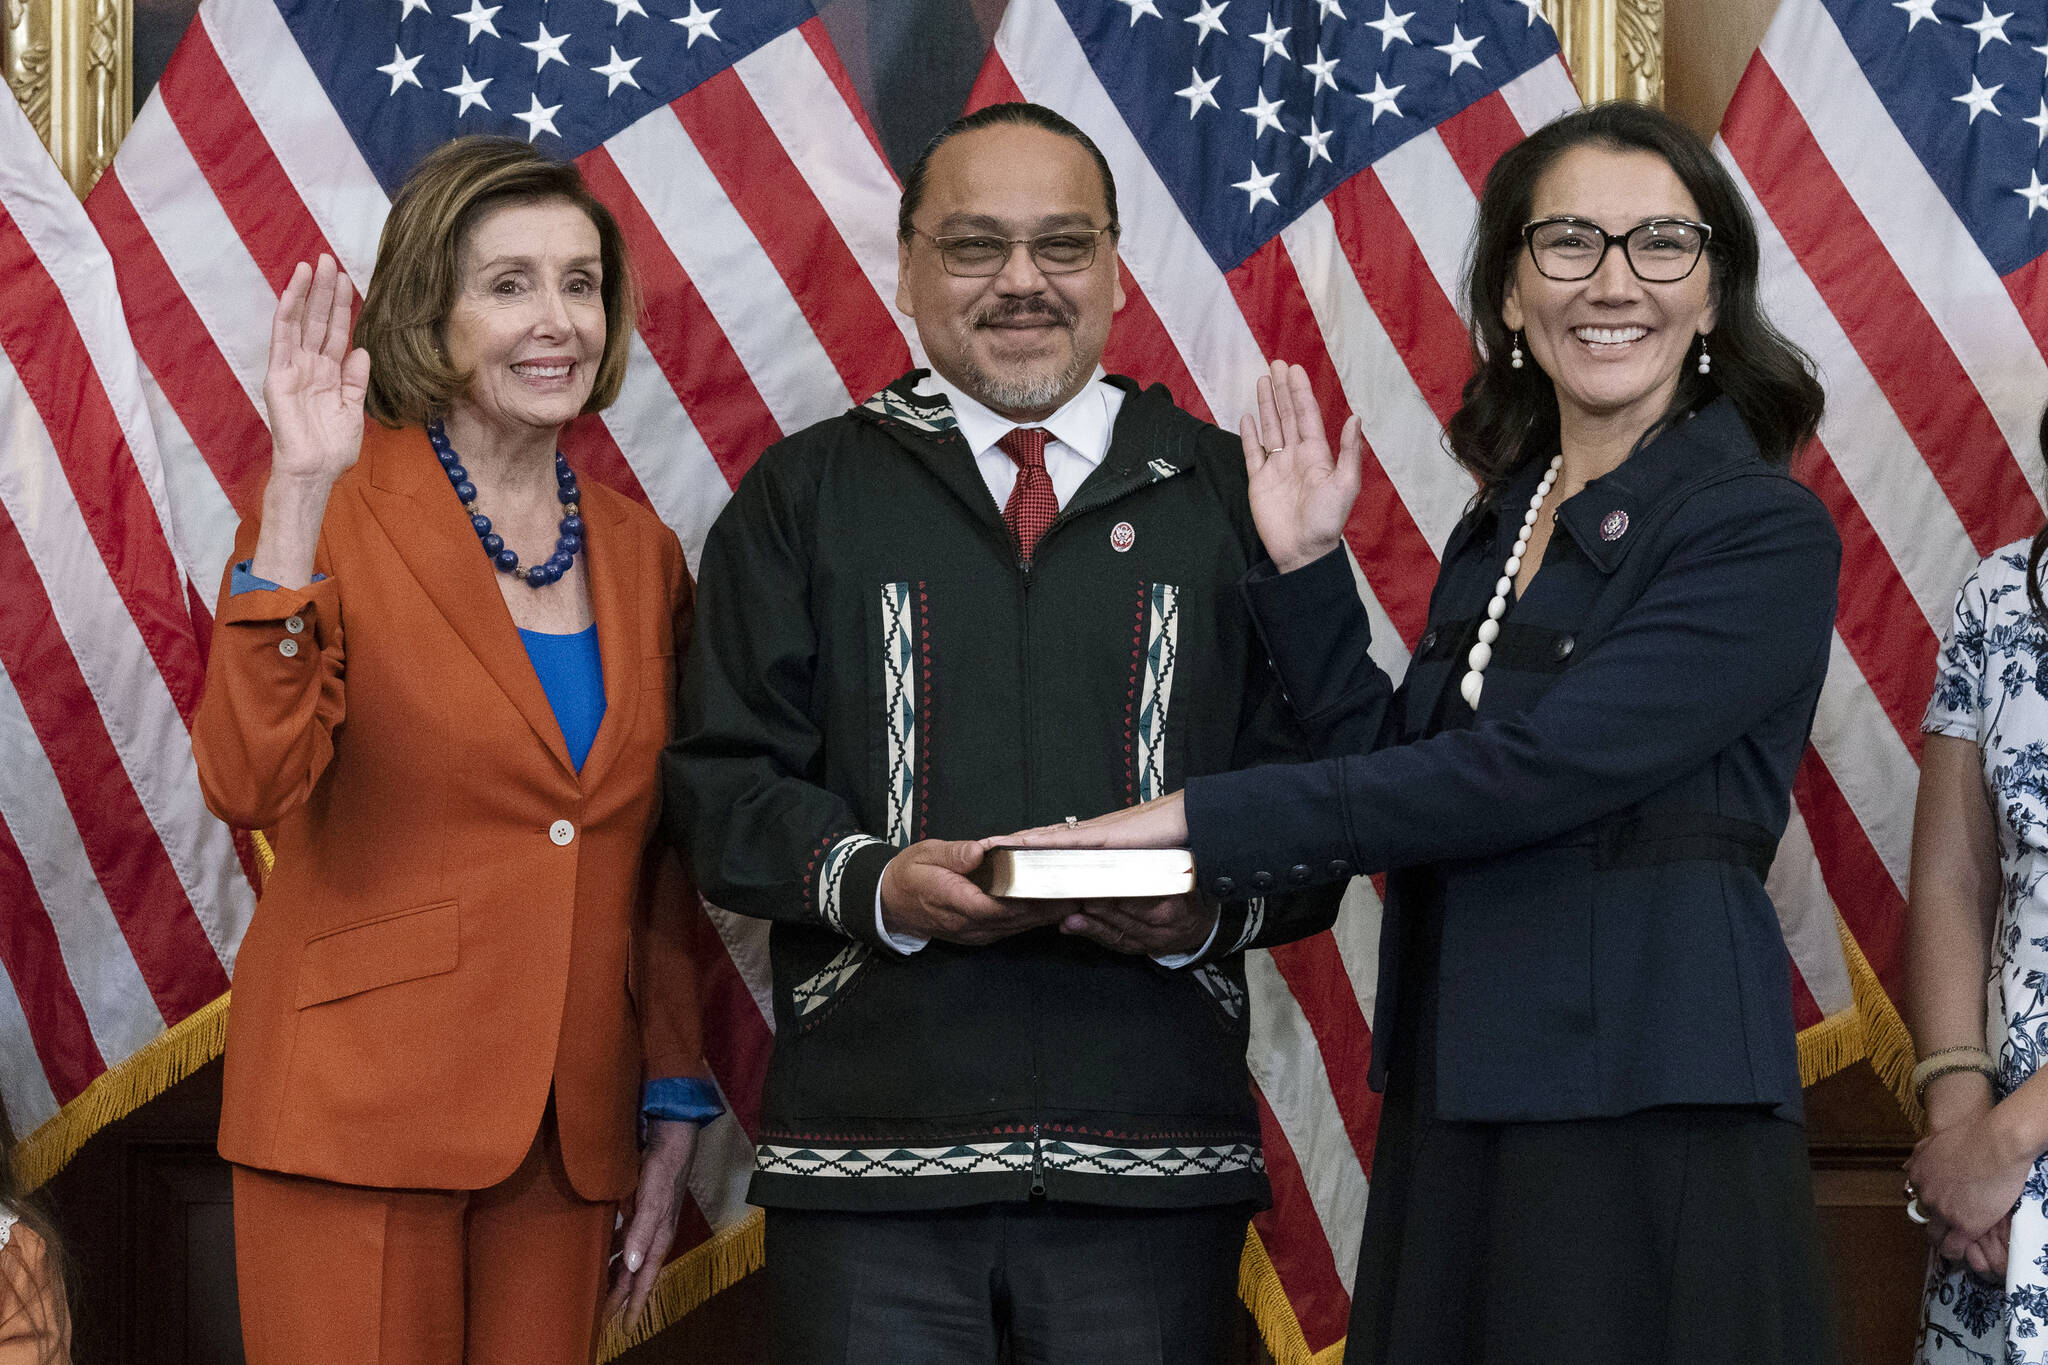 Speaker of the House Nancy Pelosi of Calif., left, administers the House oath of office to Rep. Mary Peltola, D-Alaska, standing next to her husband Eugene “Buzzy” Peltola Jr., center, during a ceremonial swearing-in on Capitol Hill in Washington, Tuesday, Sept. 13, 2022. Peltola’s husband Eugene has died in an airplane crash in Alaska, her office said Wednesday. ( AP Photo/Jose Luis Magana, File)